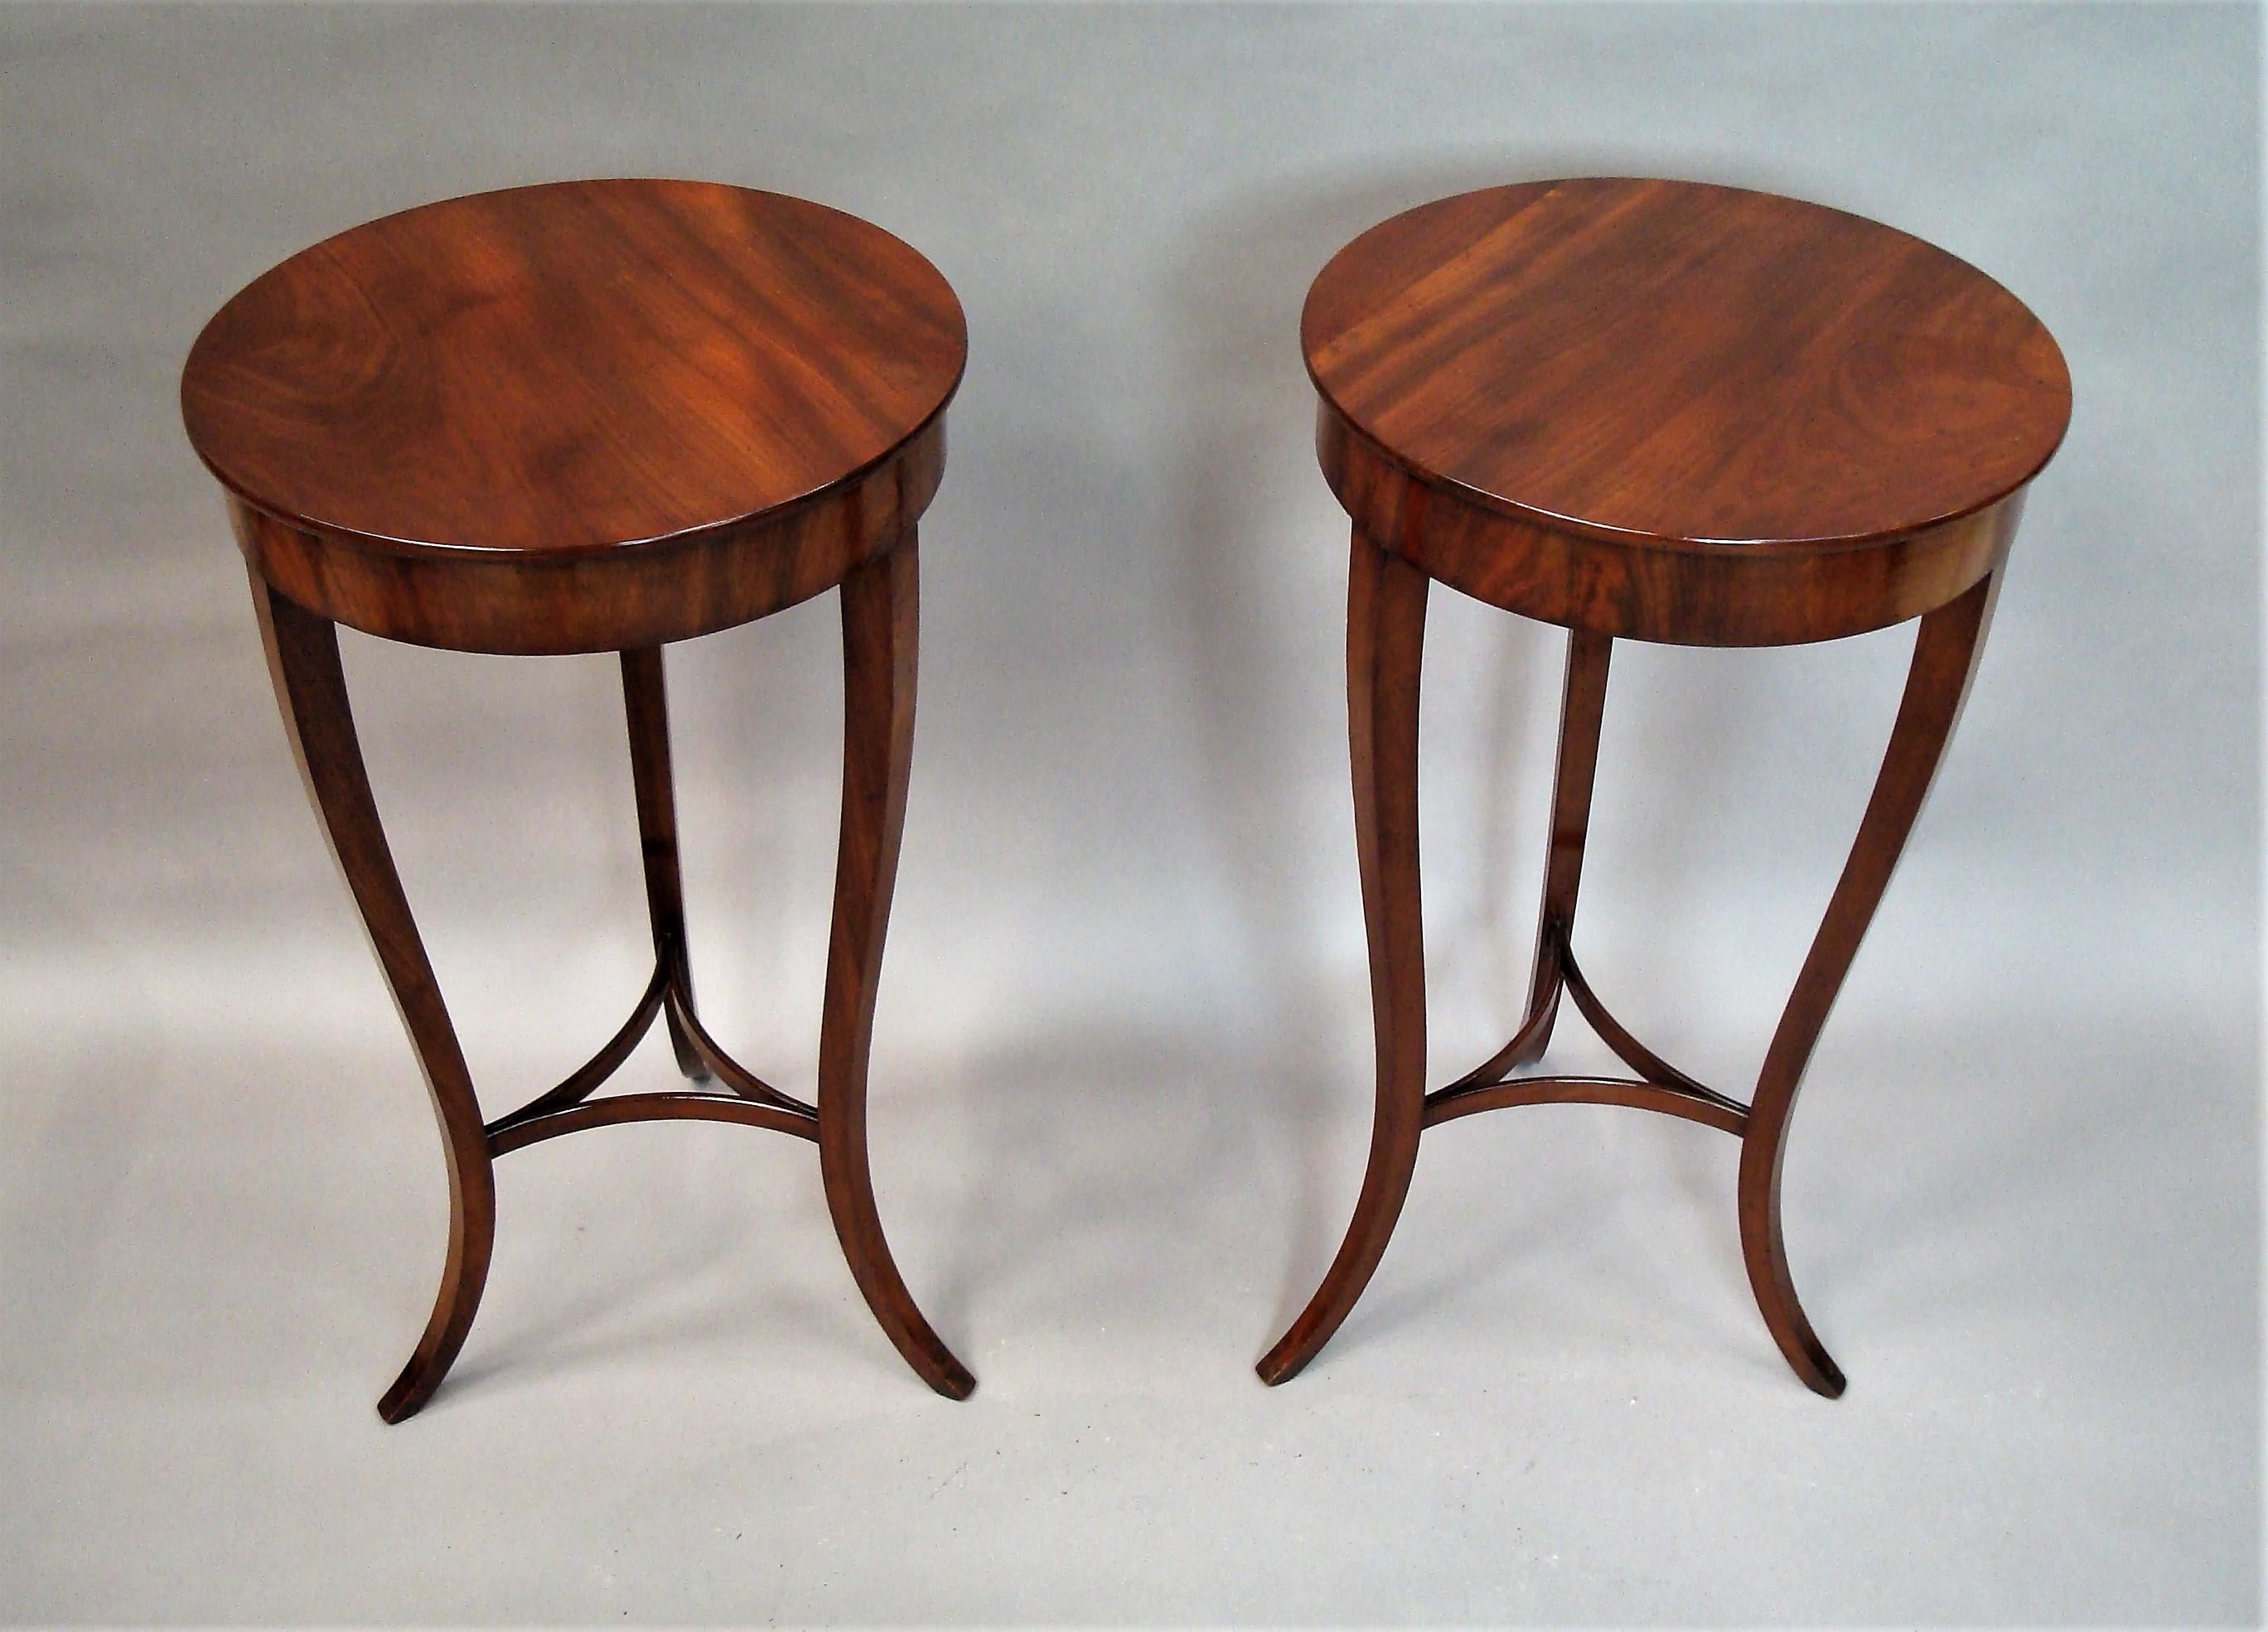 Elegant 19th century pair of mahogany occasional / end tables of stylish design; the well figured circular tops with a slender molded edge above a flame mahogany inset frieze raised on three tapering swept legs united by shaped stretchers. Good